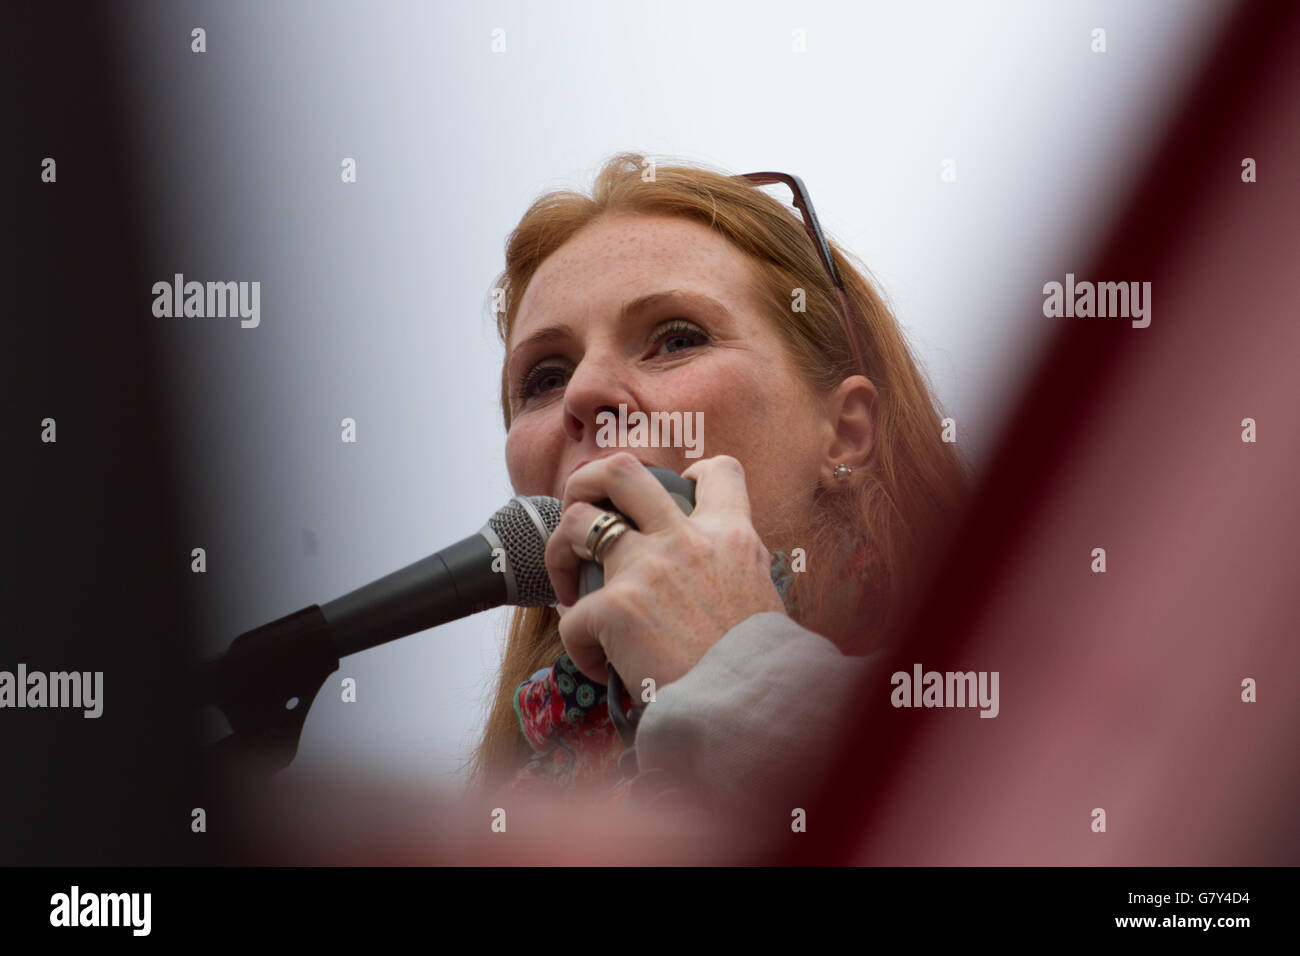 London, England. 27th June 2016. Keep Corbyn rally in London, UK. Angela Rayner MP delivers a speech in support of Jeremy Corbyn. Brayan Alexander Lopez Garzon/Alamy Live News Stock Photo